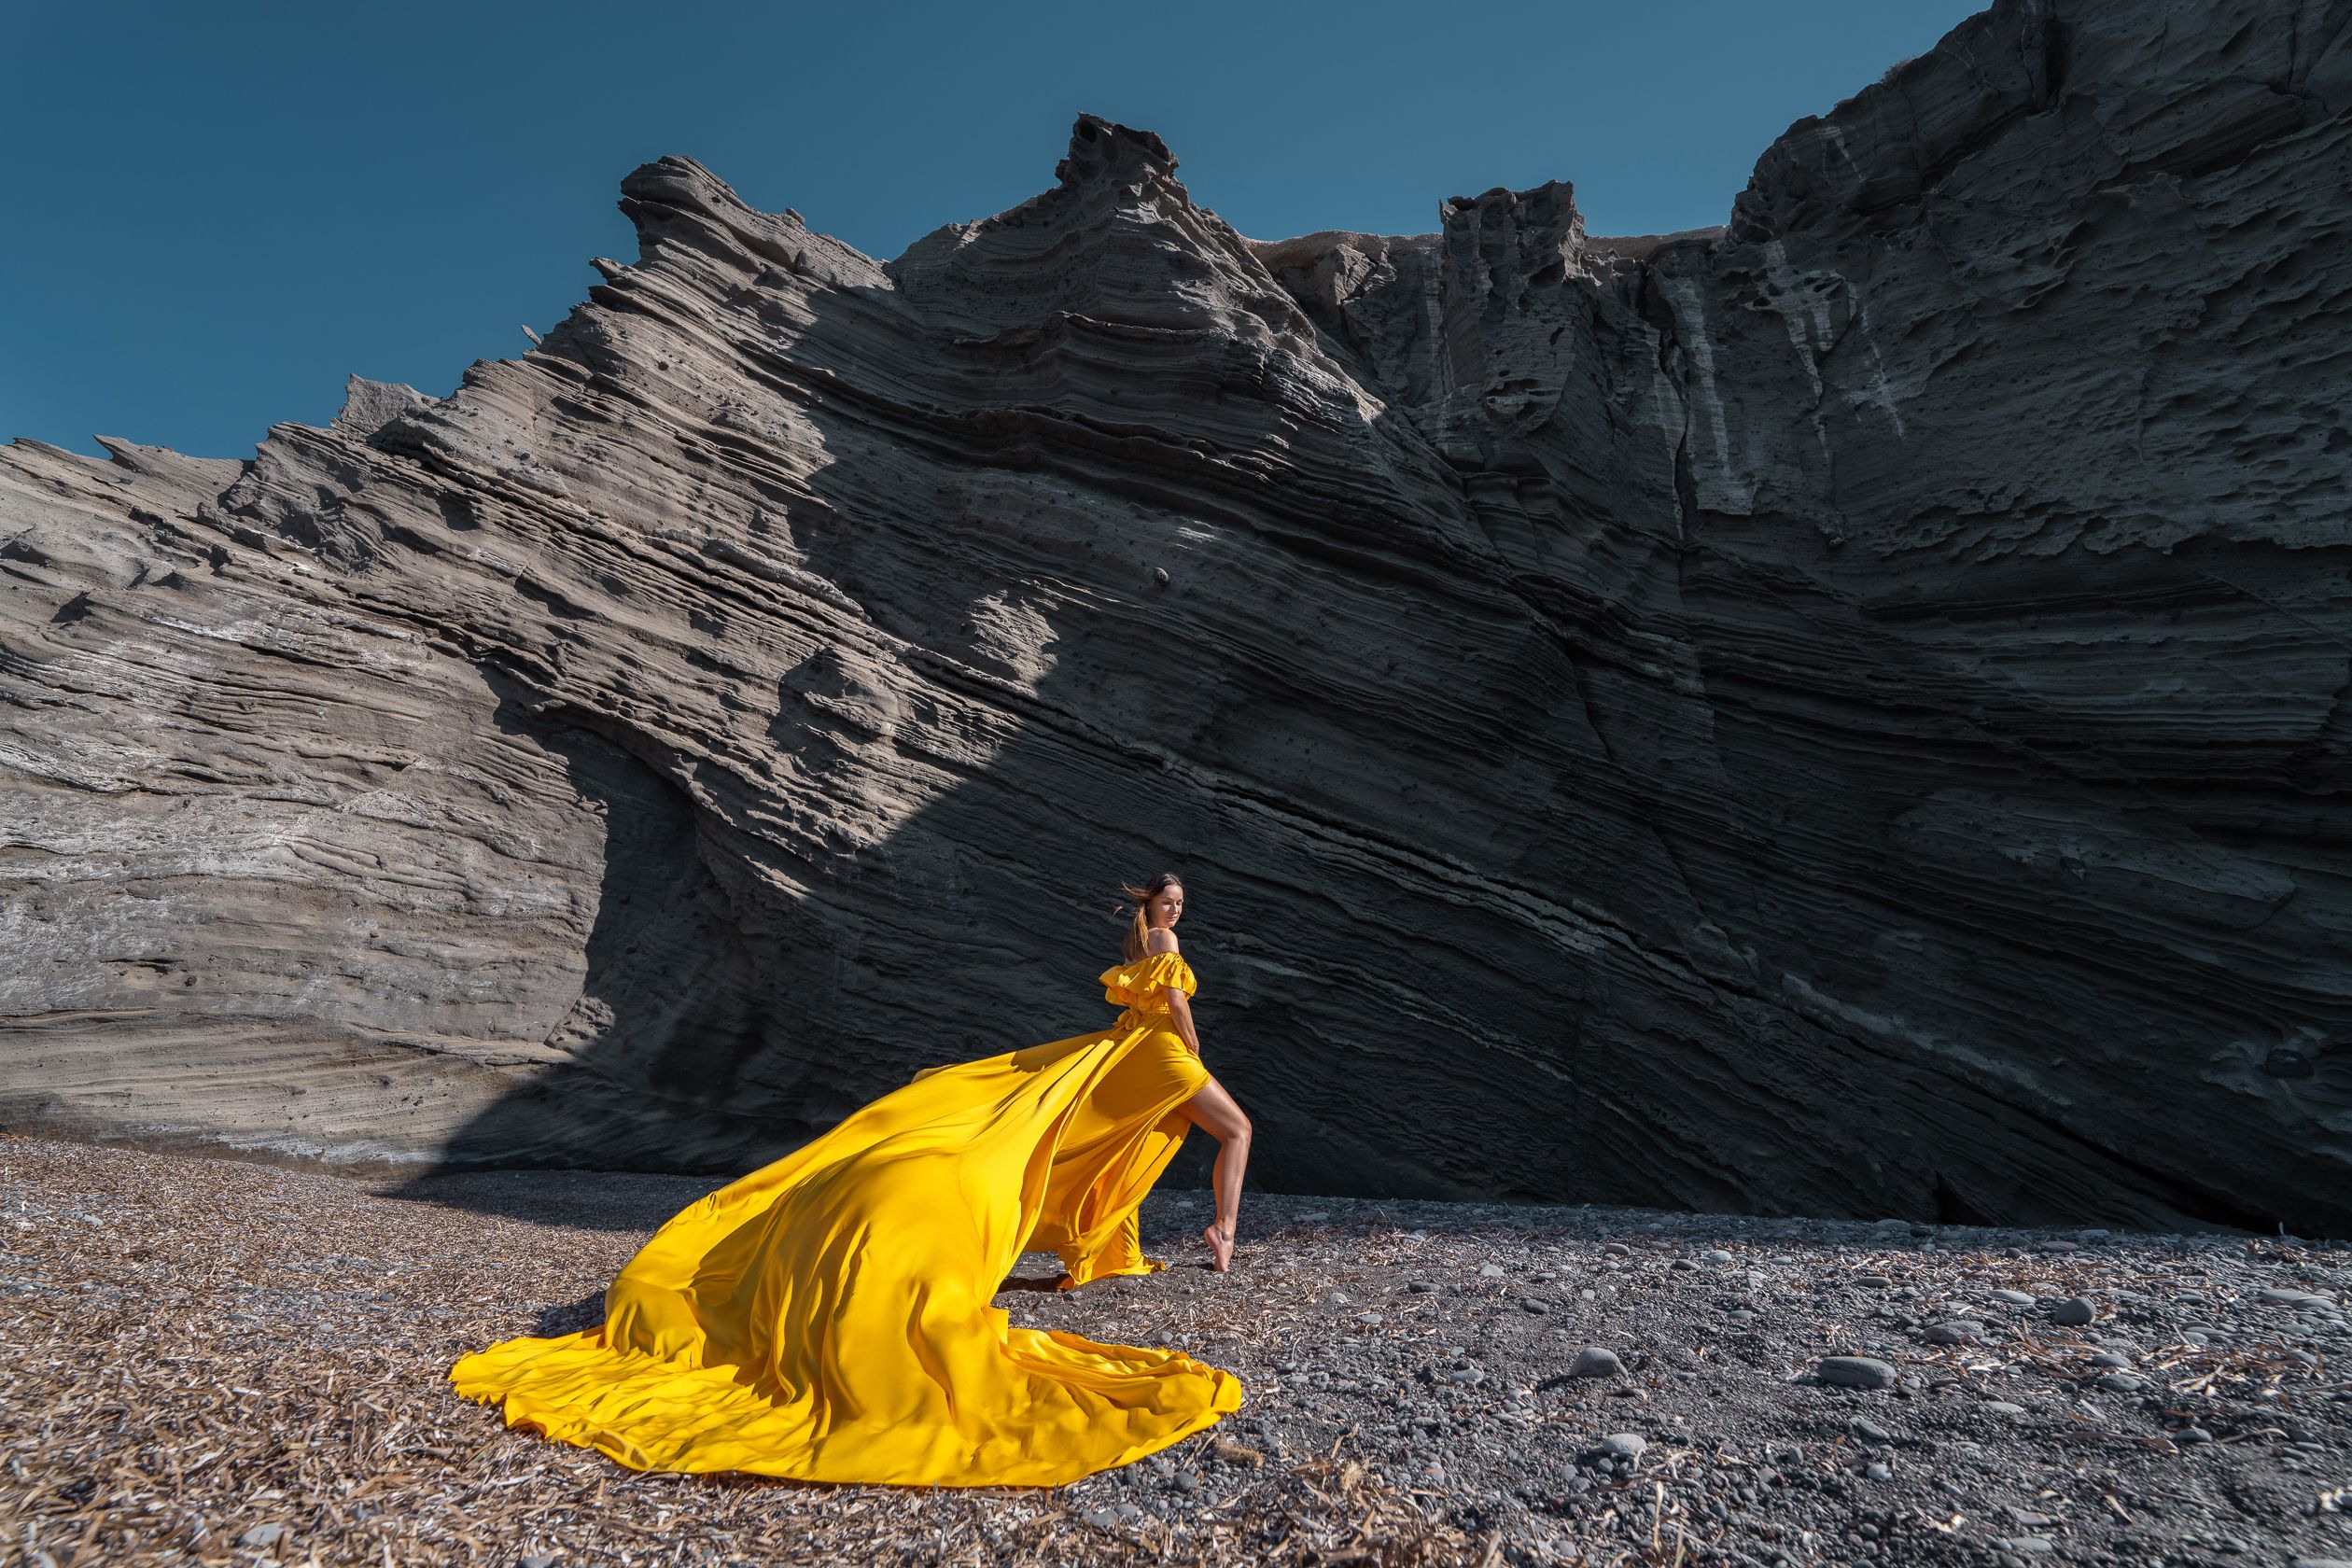 Photoshoot at the black beach with a yellow flying dress